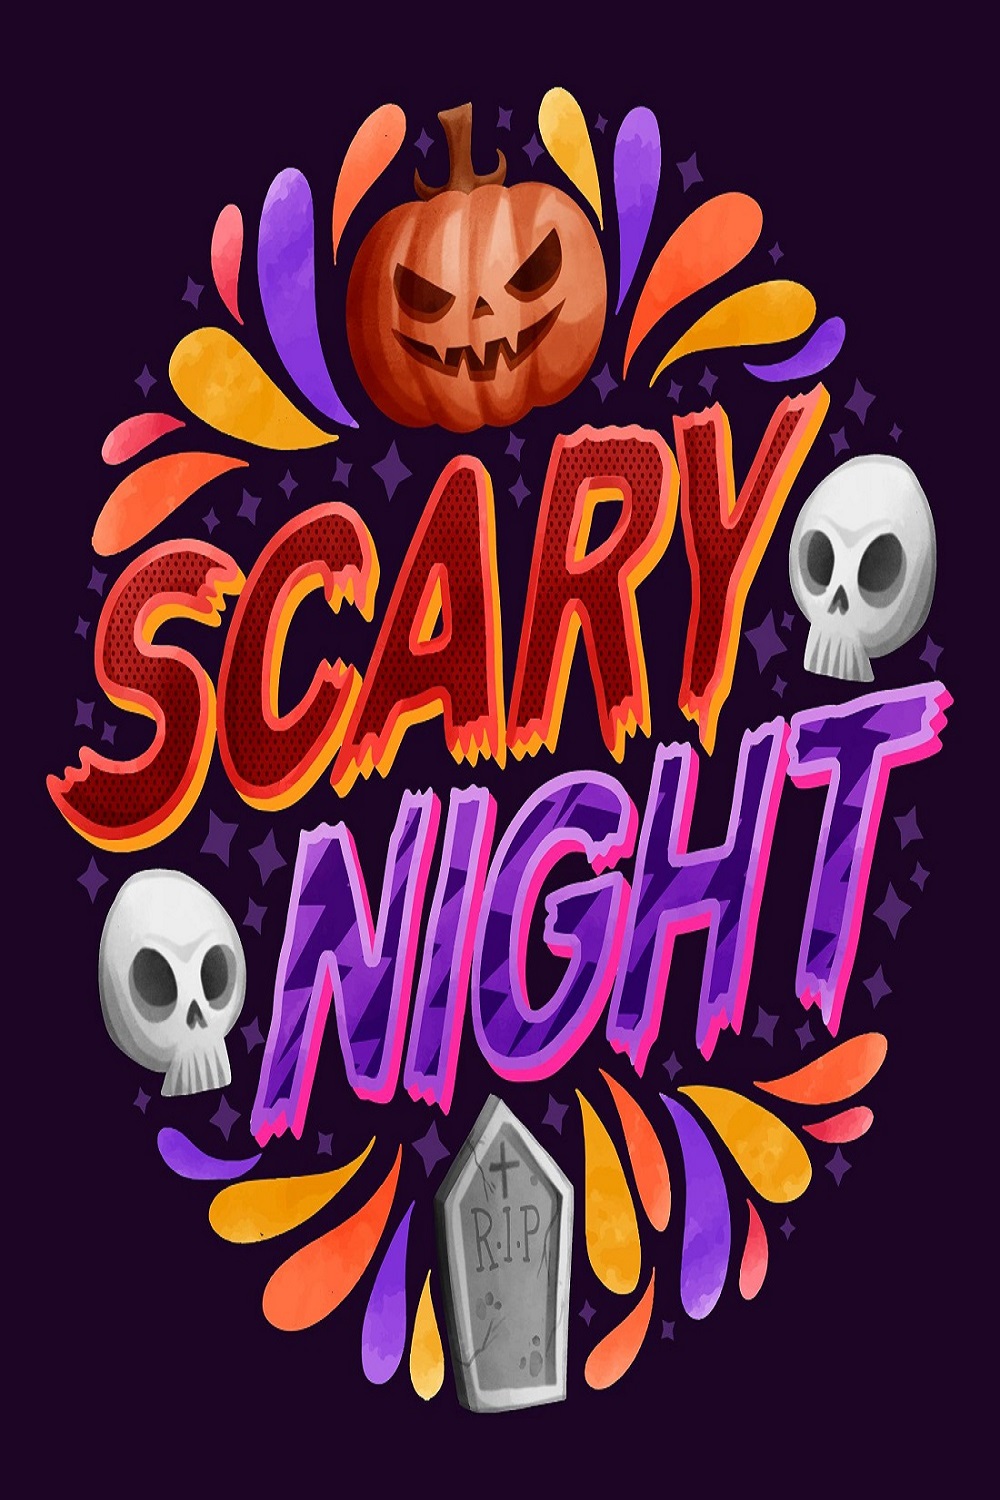 Scary night lettering pinterest preview image.